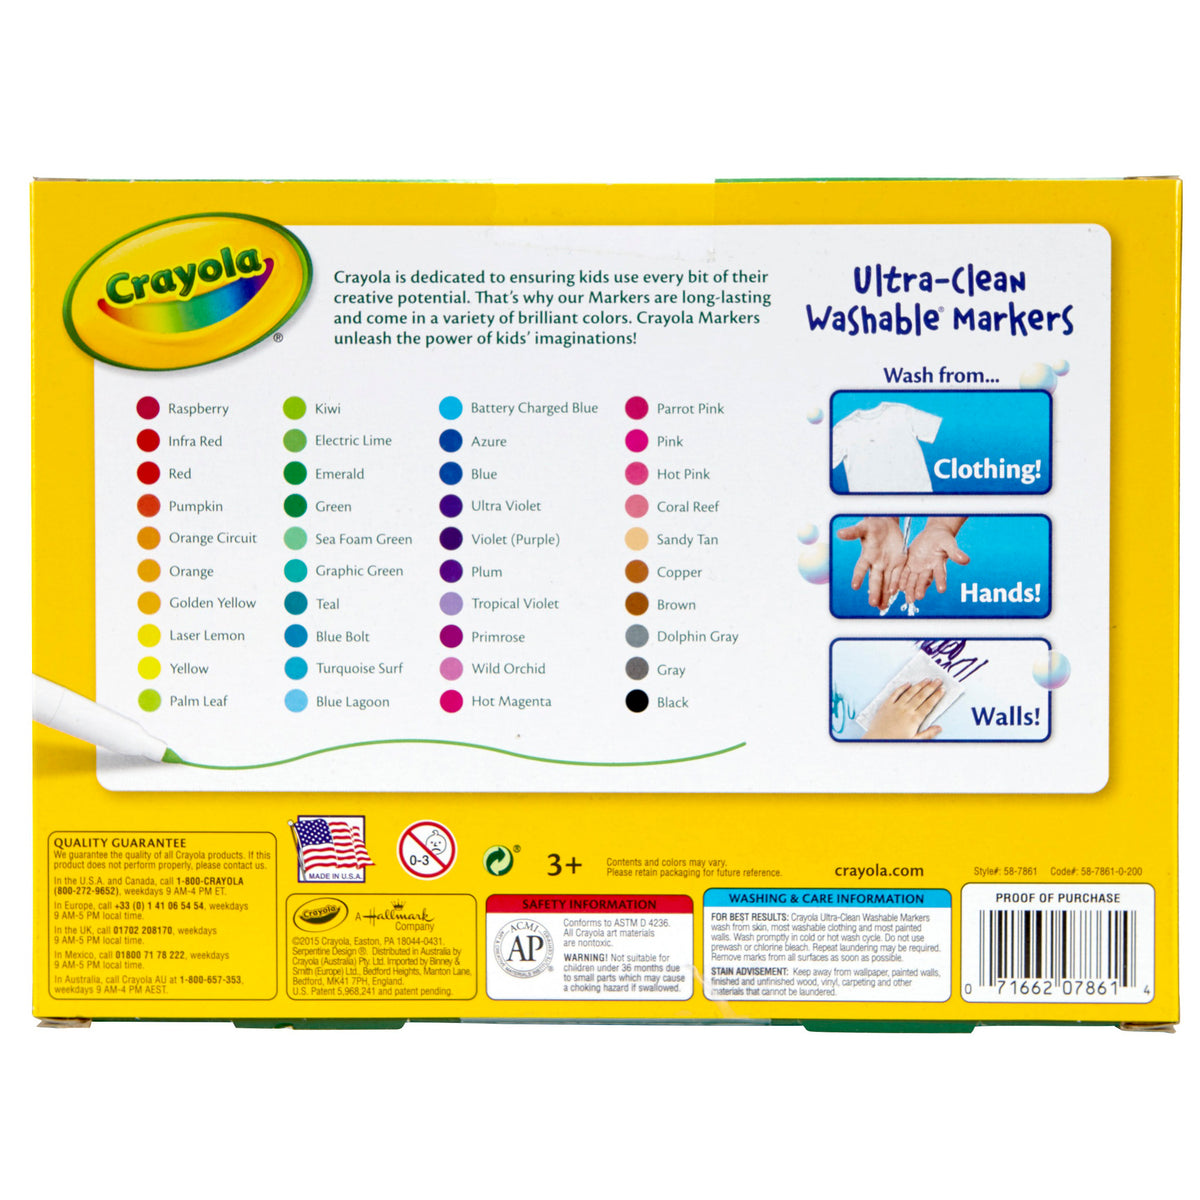 Crayola Washable Broad Line Markers 40 Colors